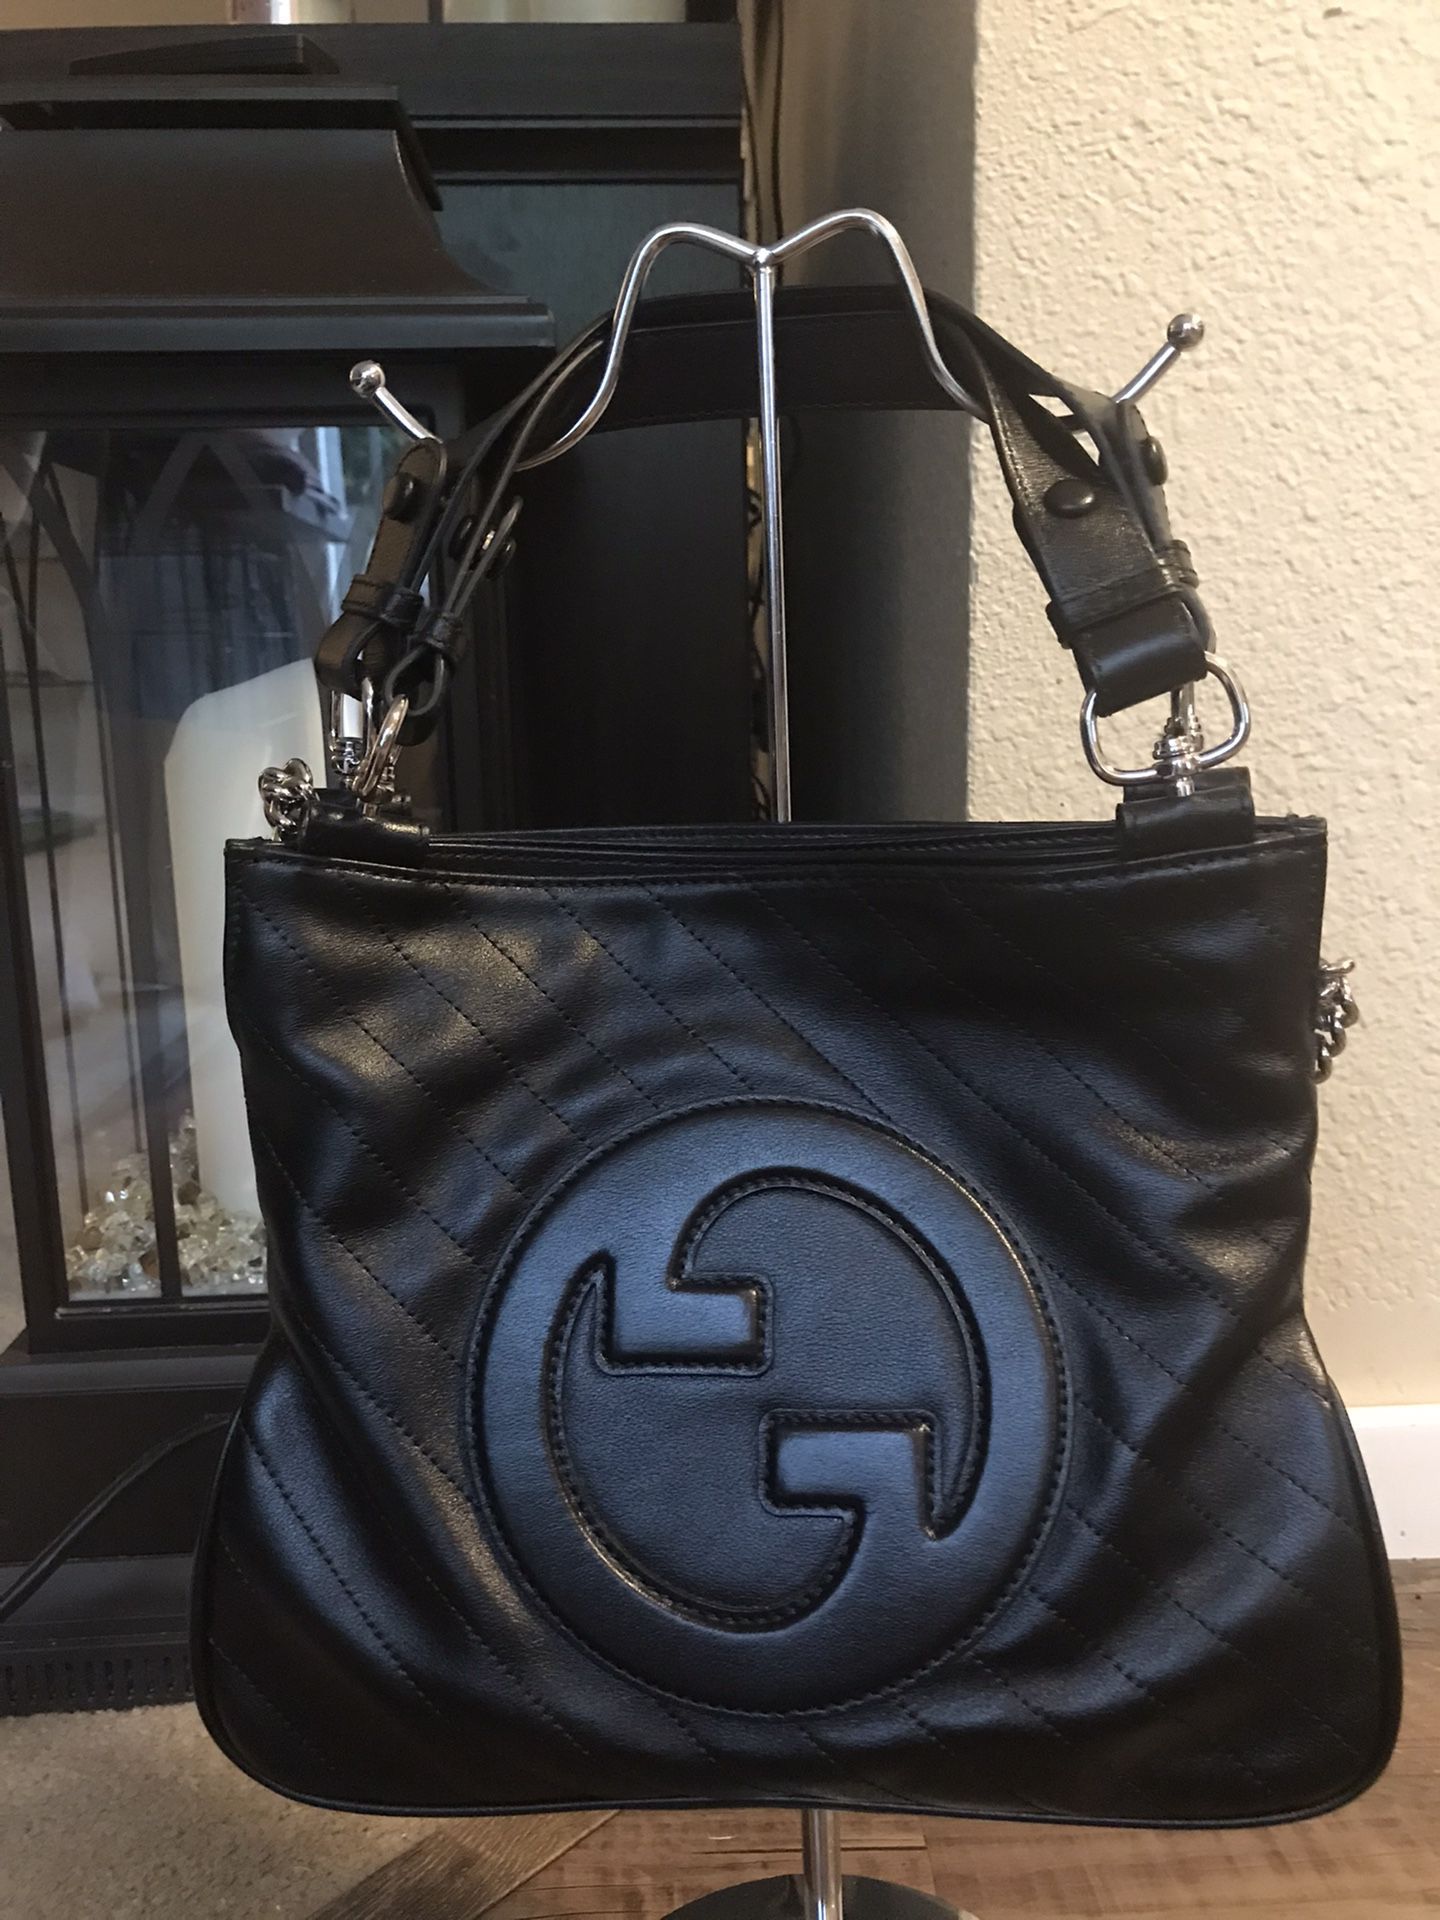 GUCCI BLONDIE SMALL TOTE BAG Black Leather